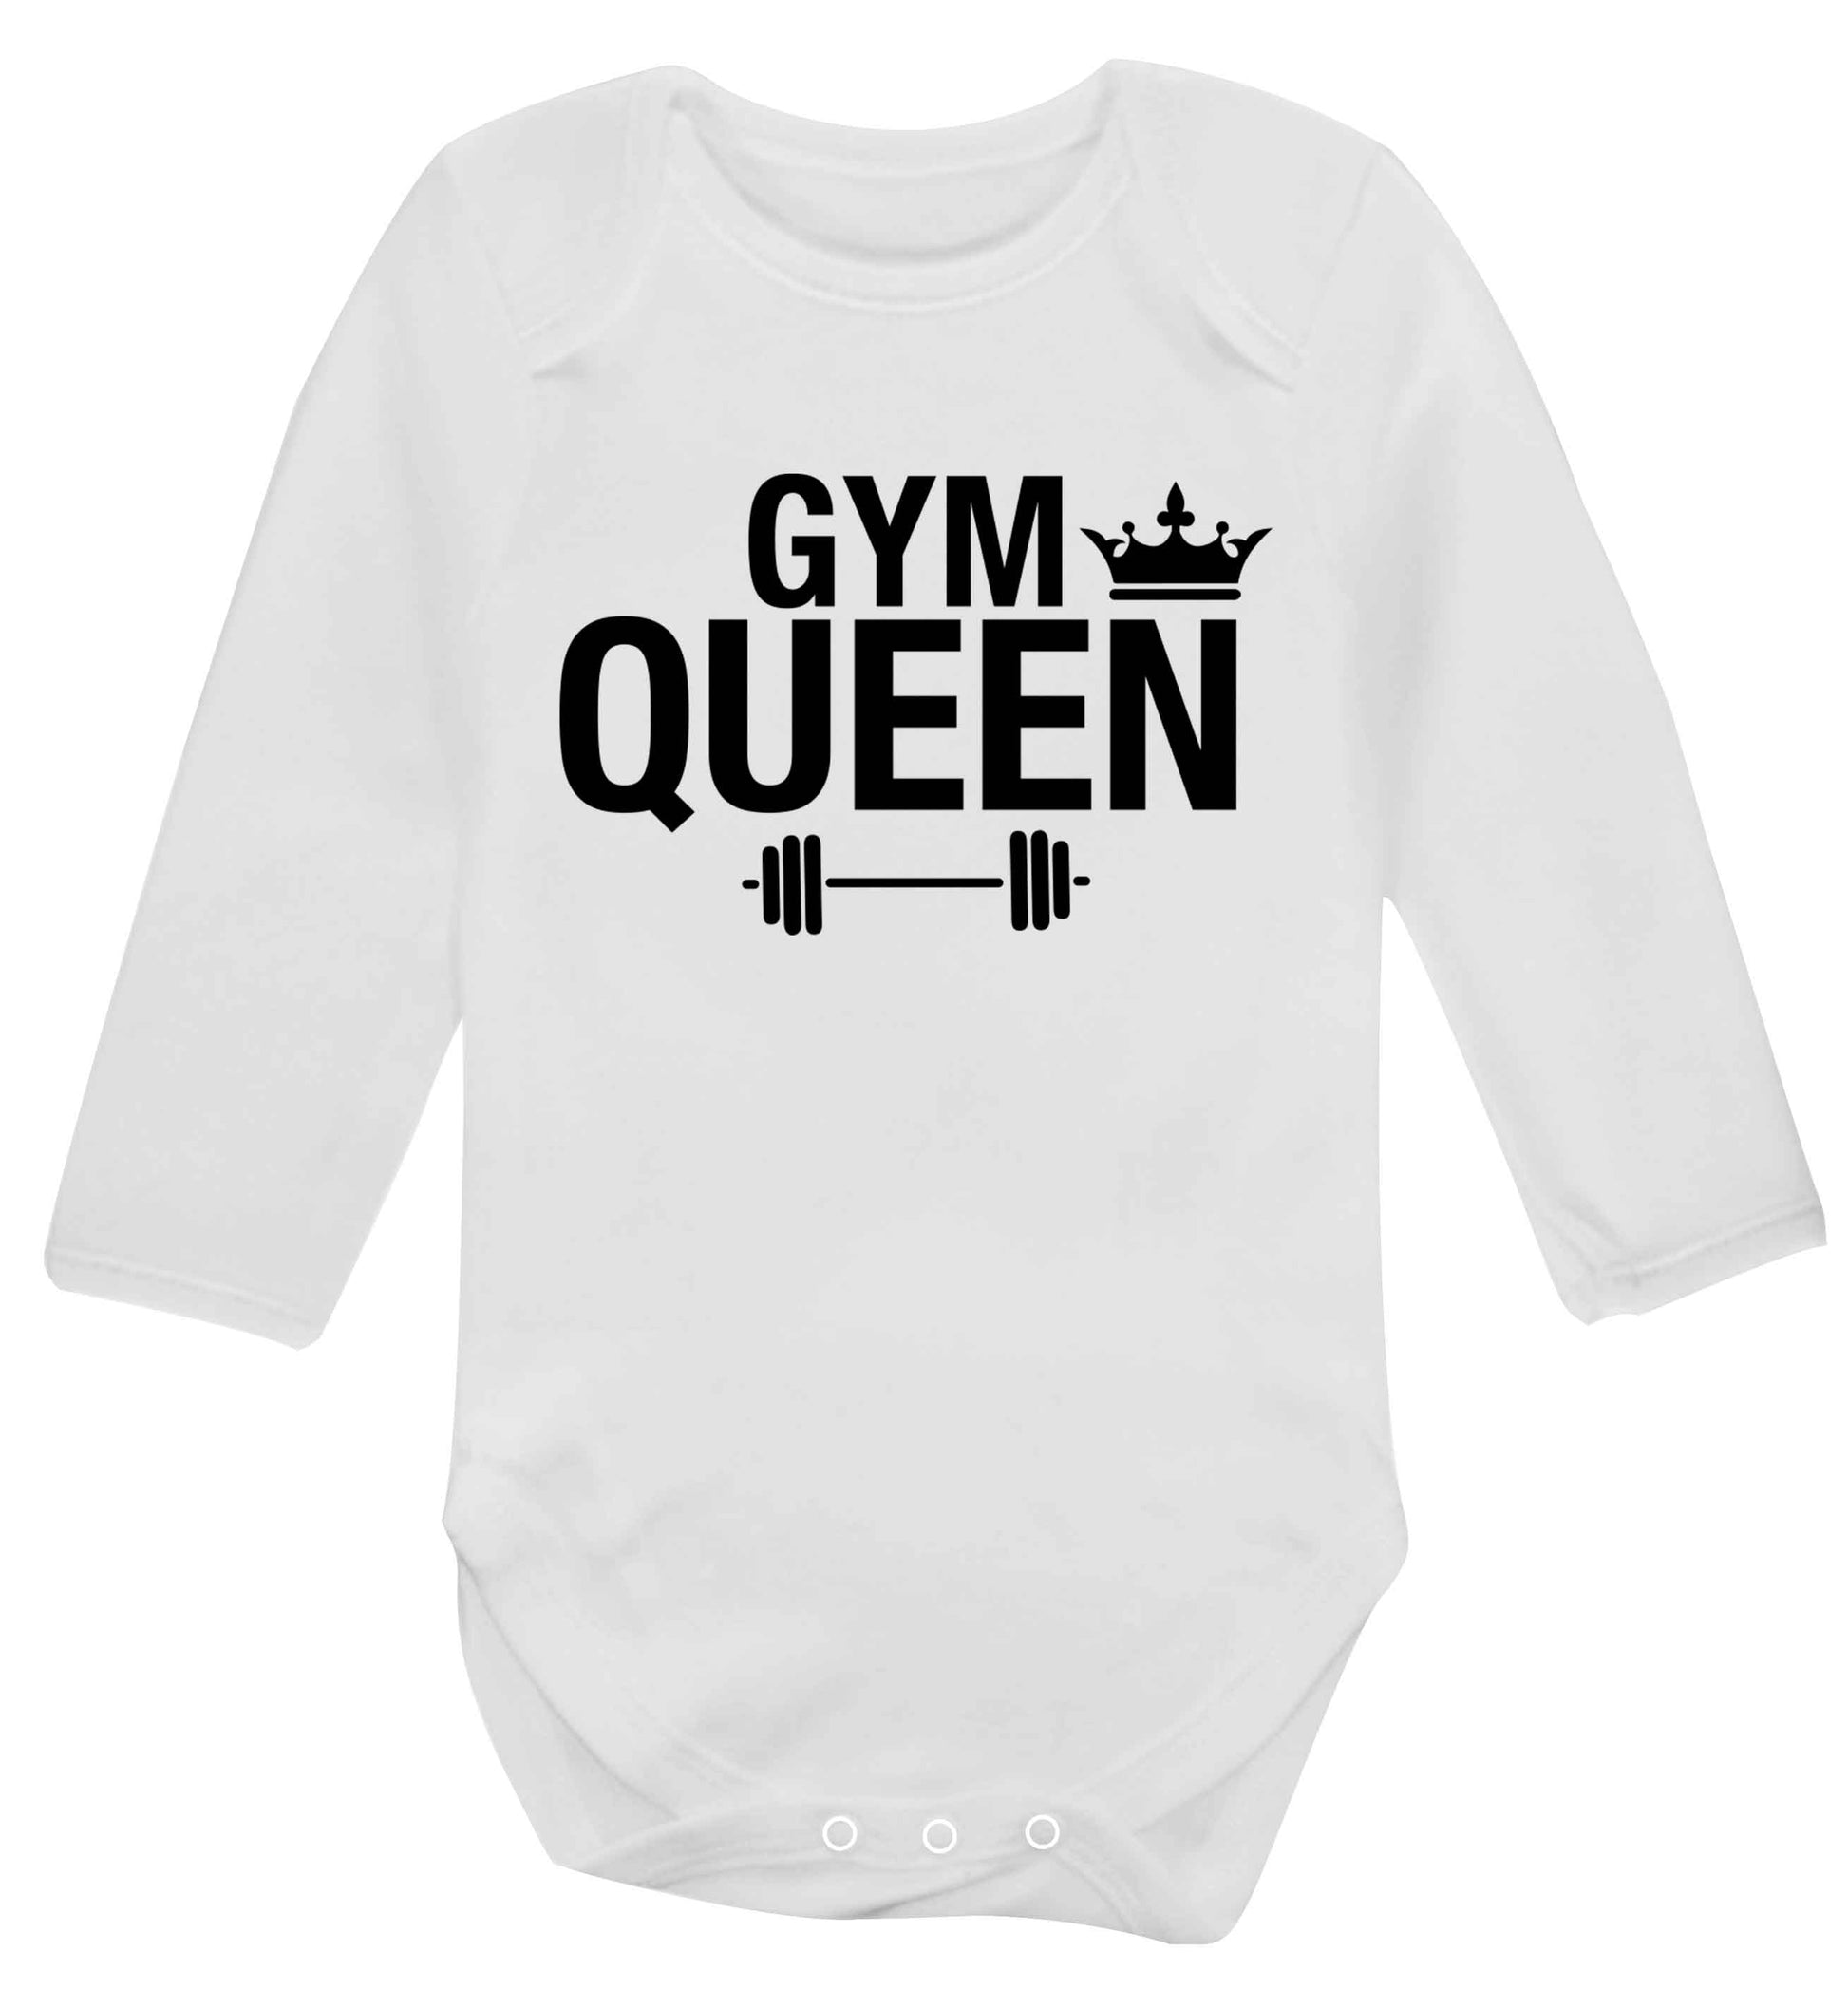 Gym queen Baby Vest long sleeved white 6-12 months